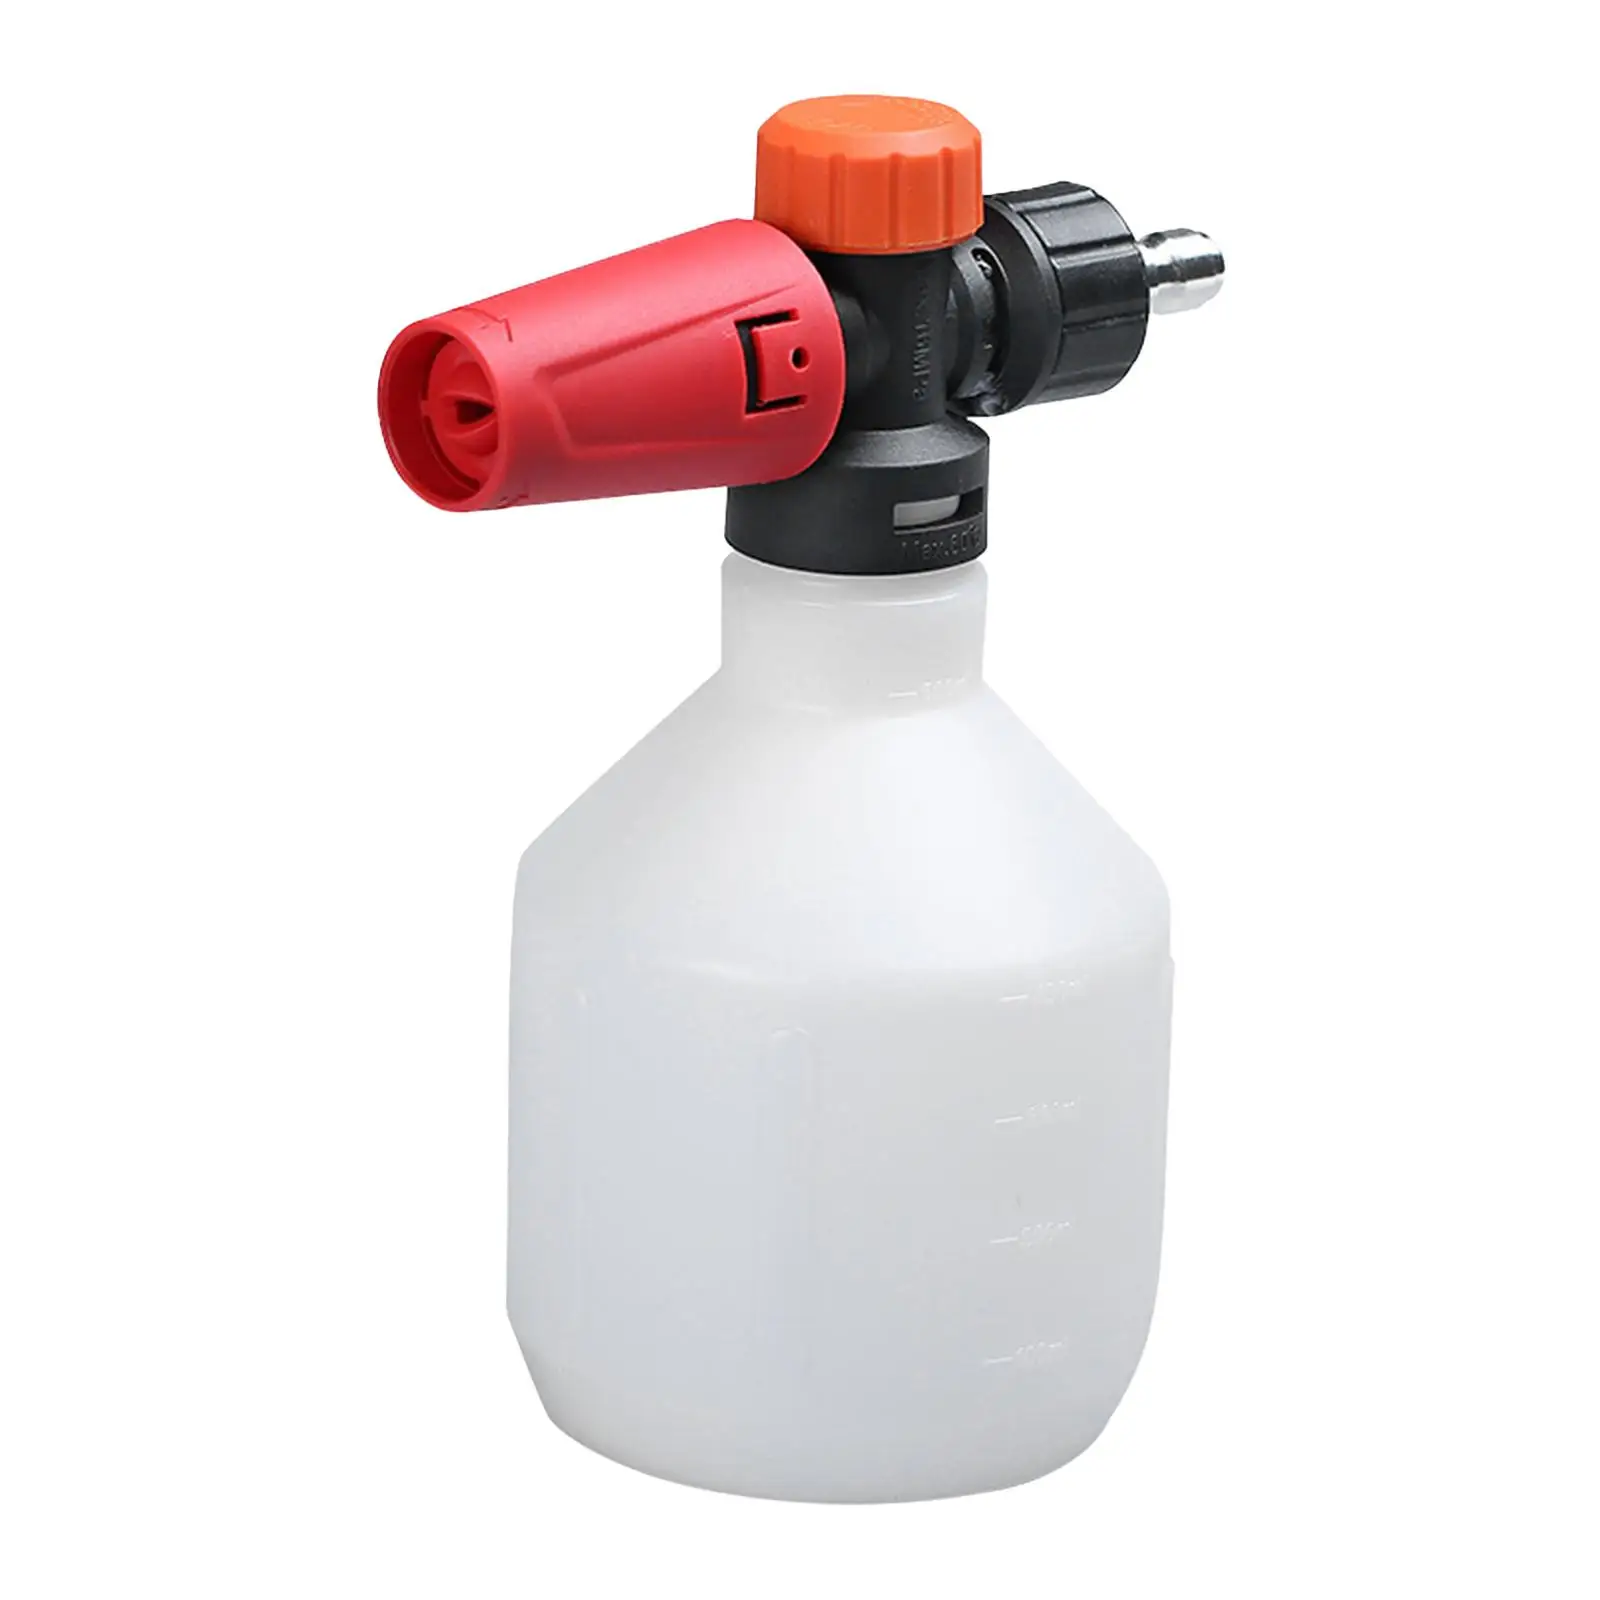 Portable Car Hand Pump Pressure Foam Sprayer Handheld for Home Cleaning